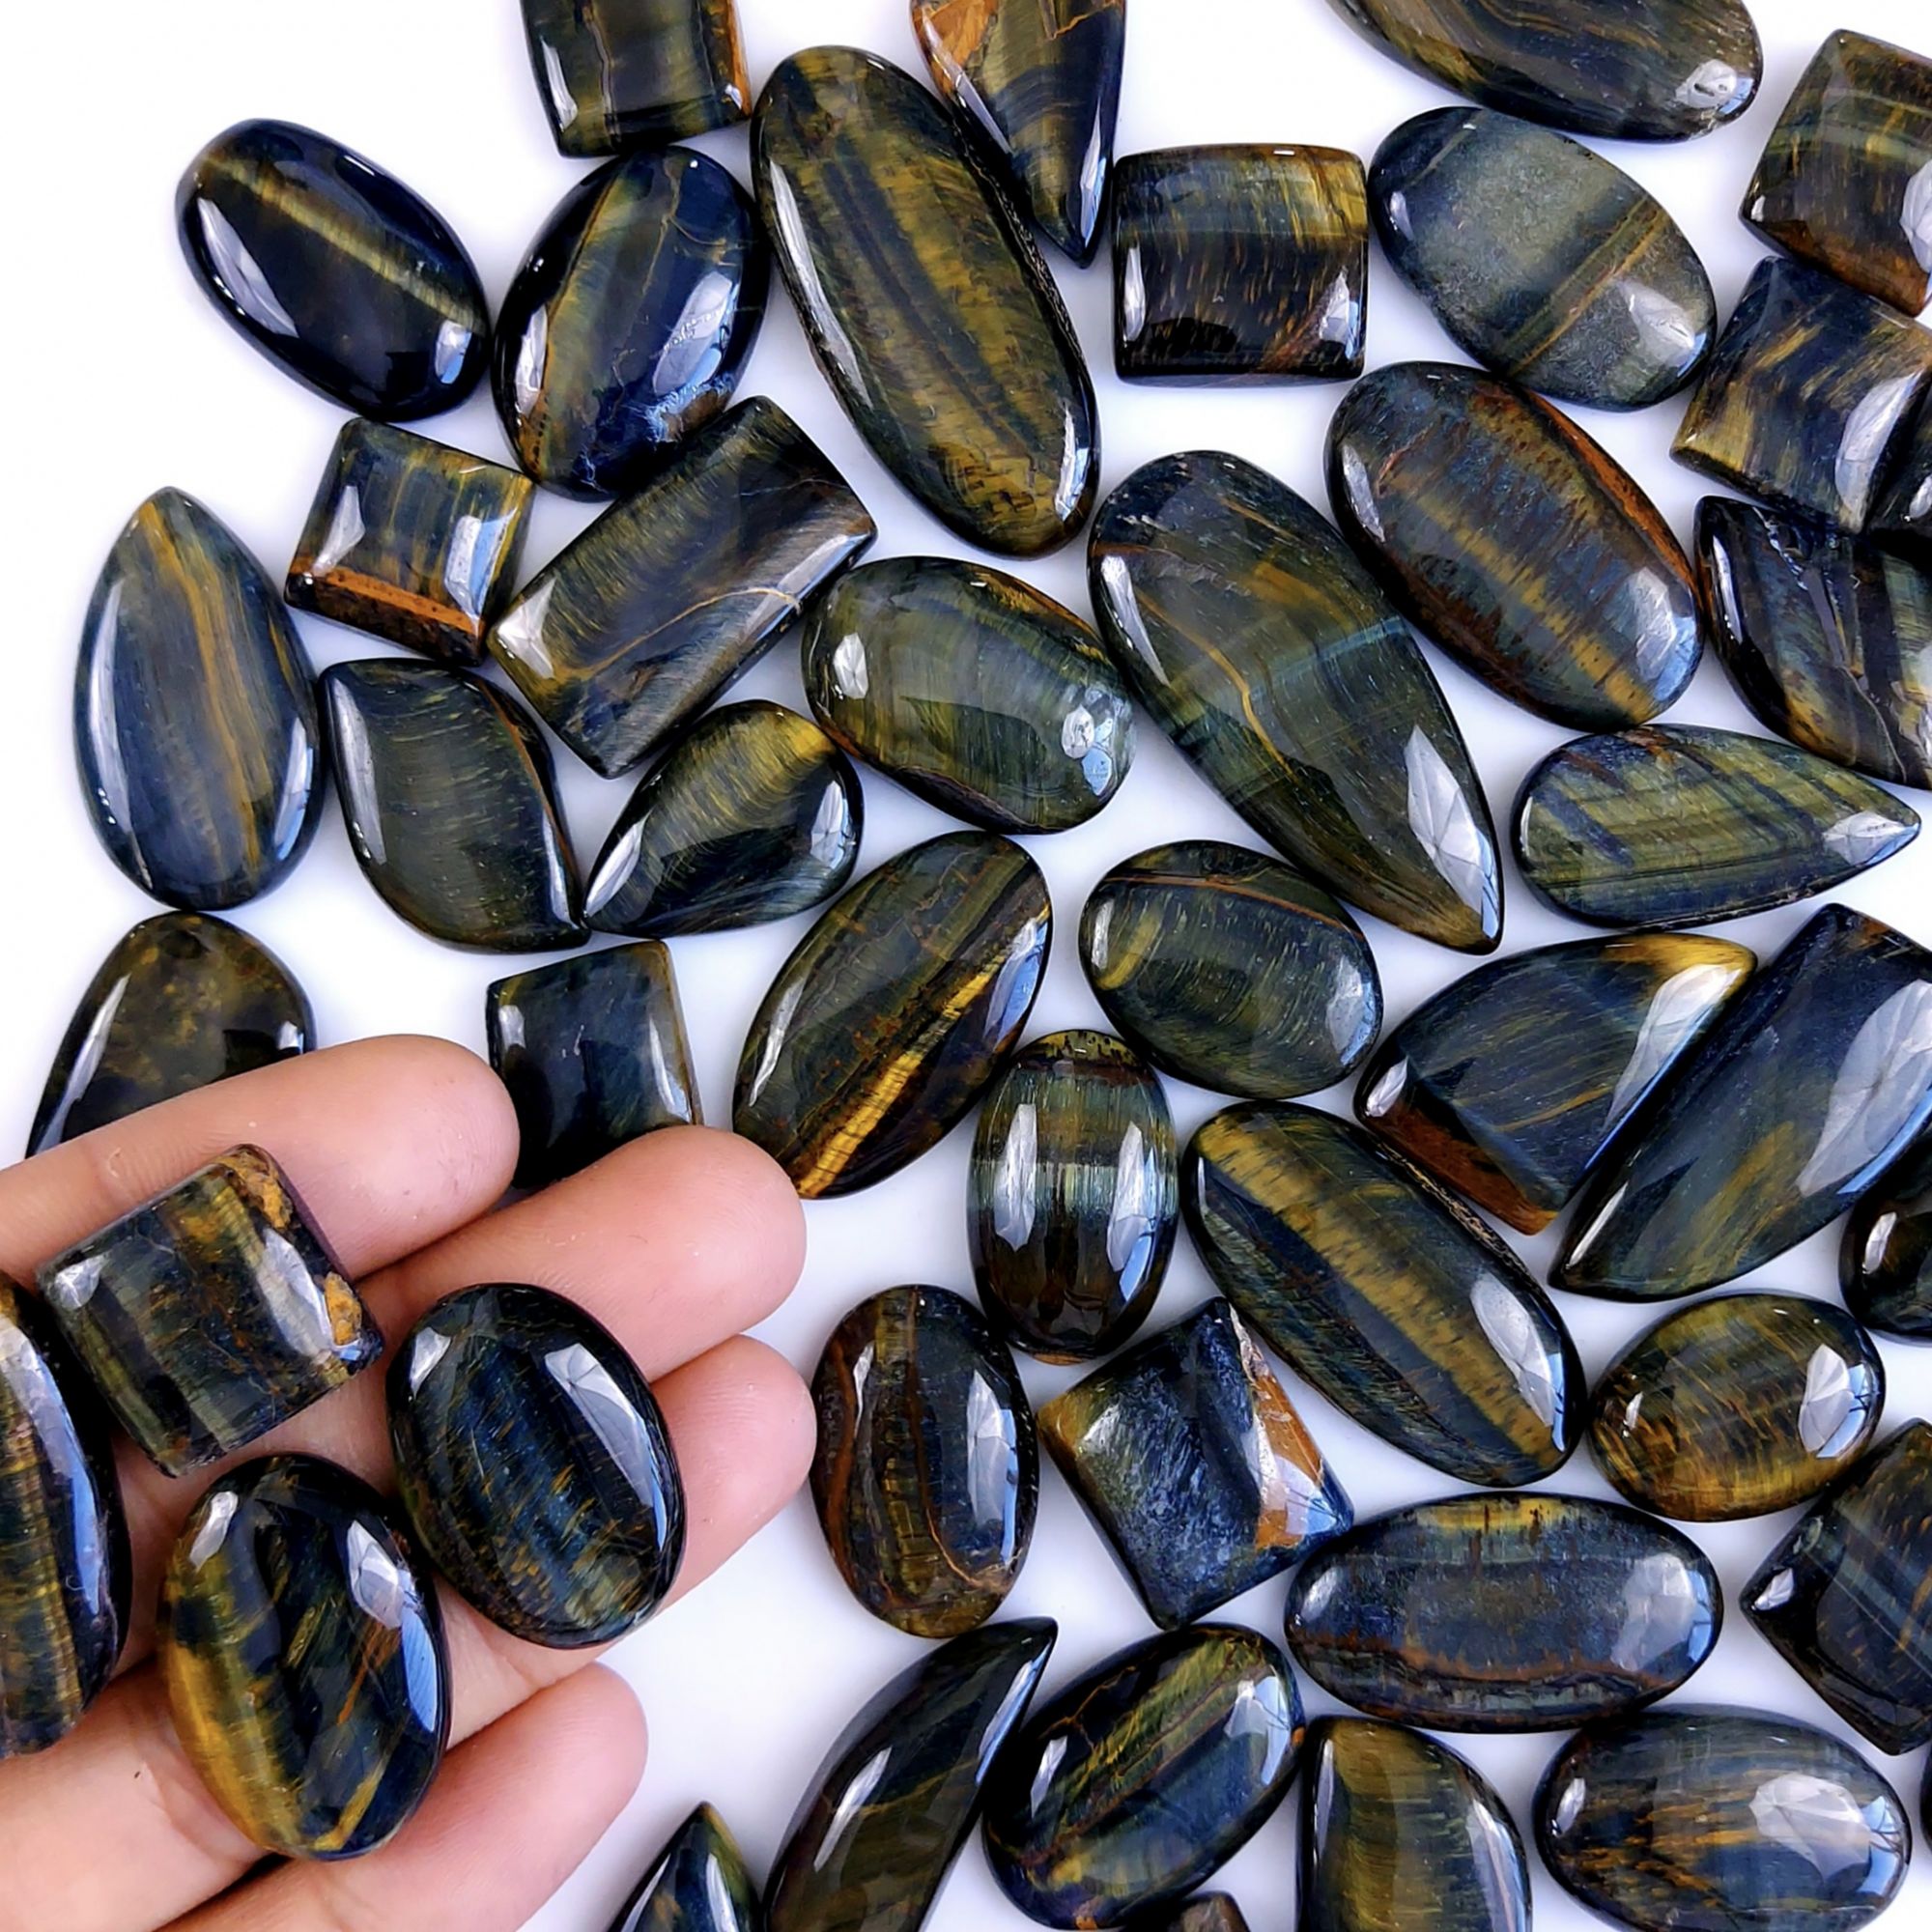 50Pcs 1293Cts Natural Tiger Eye Loose Cabochon Gemstone Lot Mix Shape and and Size for Jewelry Making 45x20 24x14mm#1318